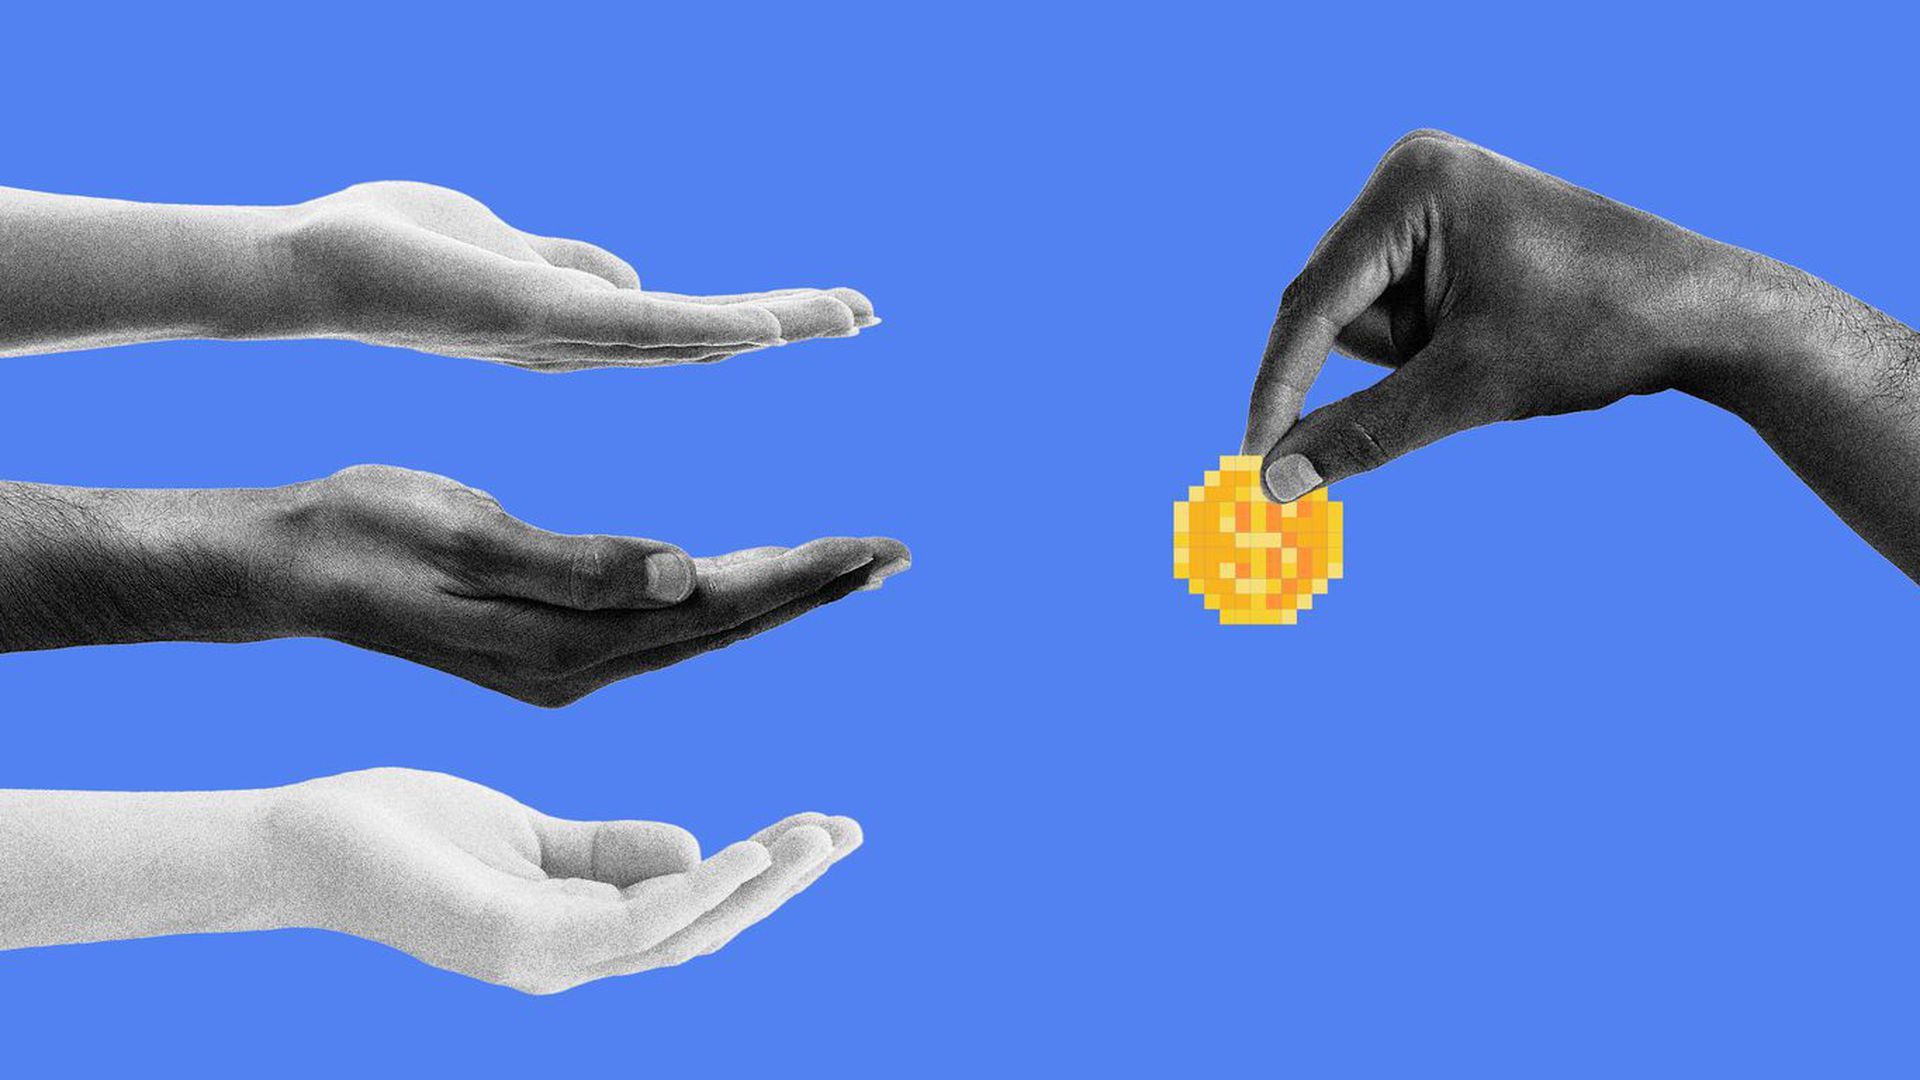 Hands reaching out to grab a digital coin.